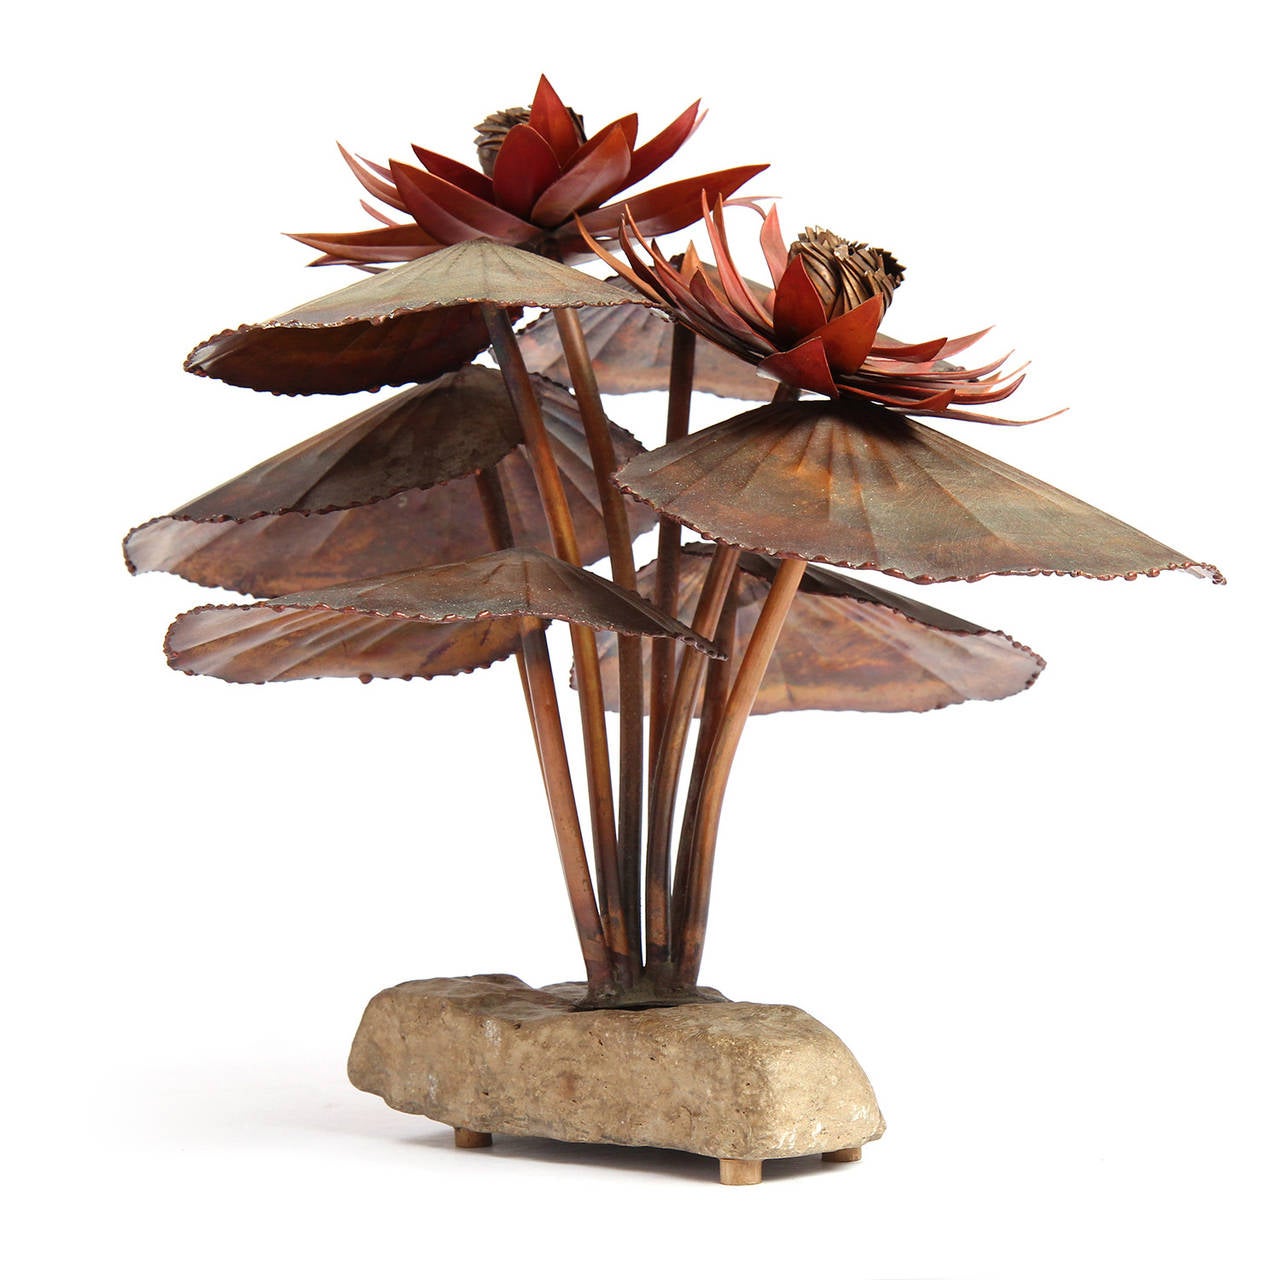 A highly expressive and unique hand made metal sculpture depicting water lilies sprouting from a stone base and having a rich variegated patina.